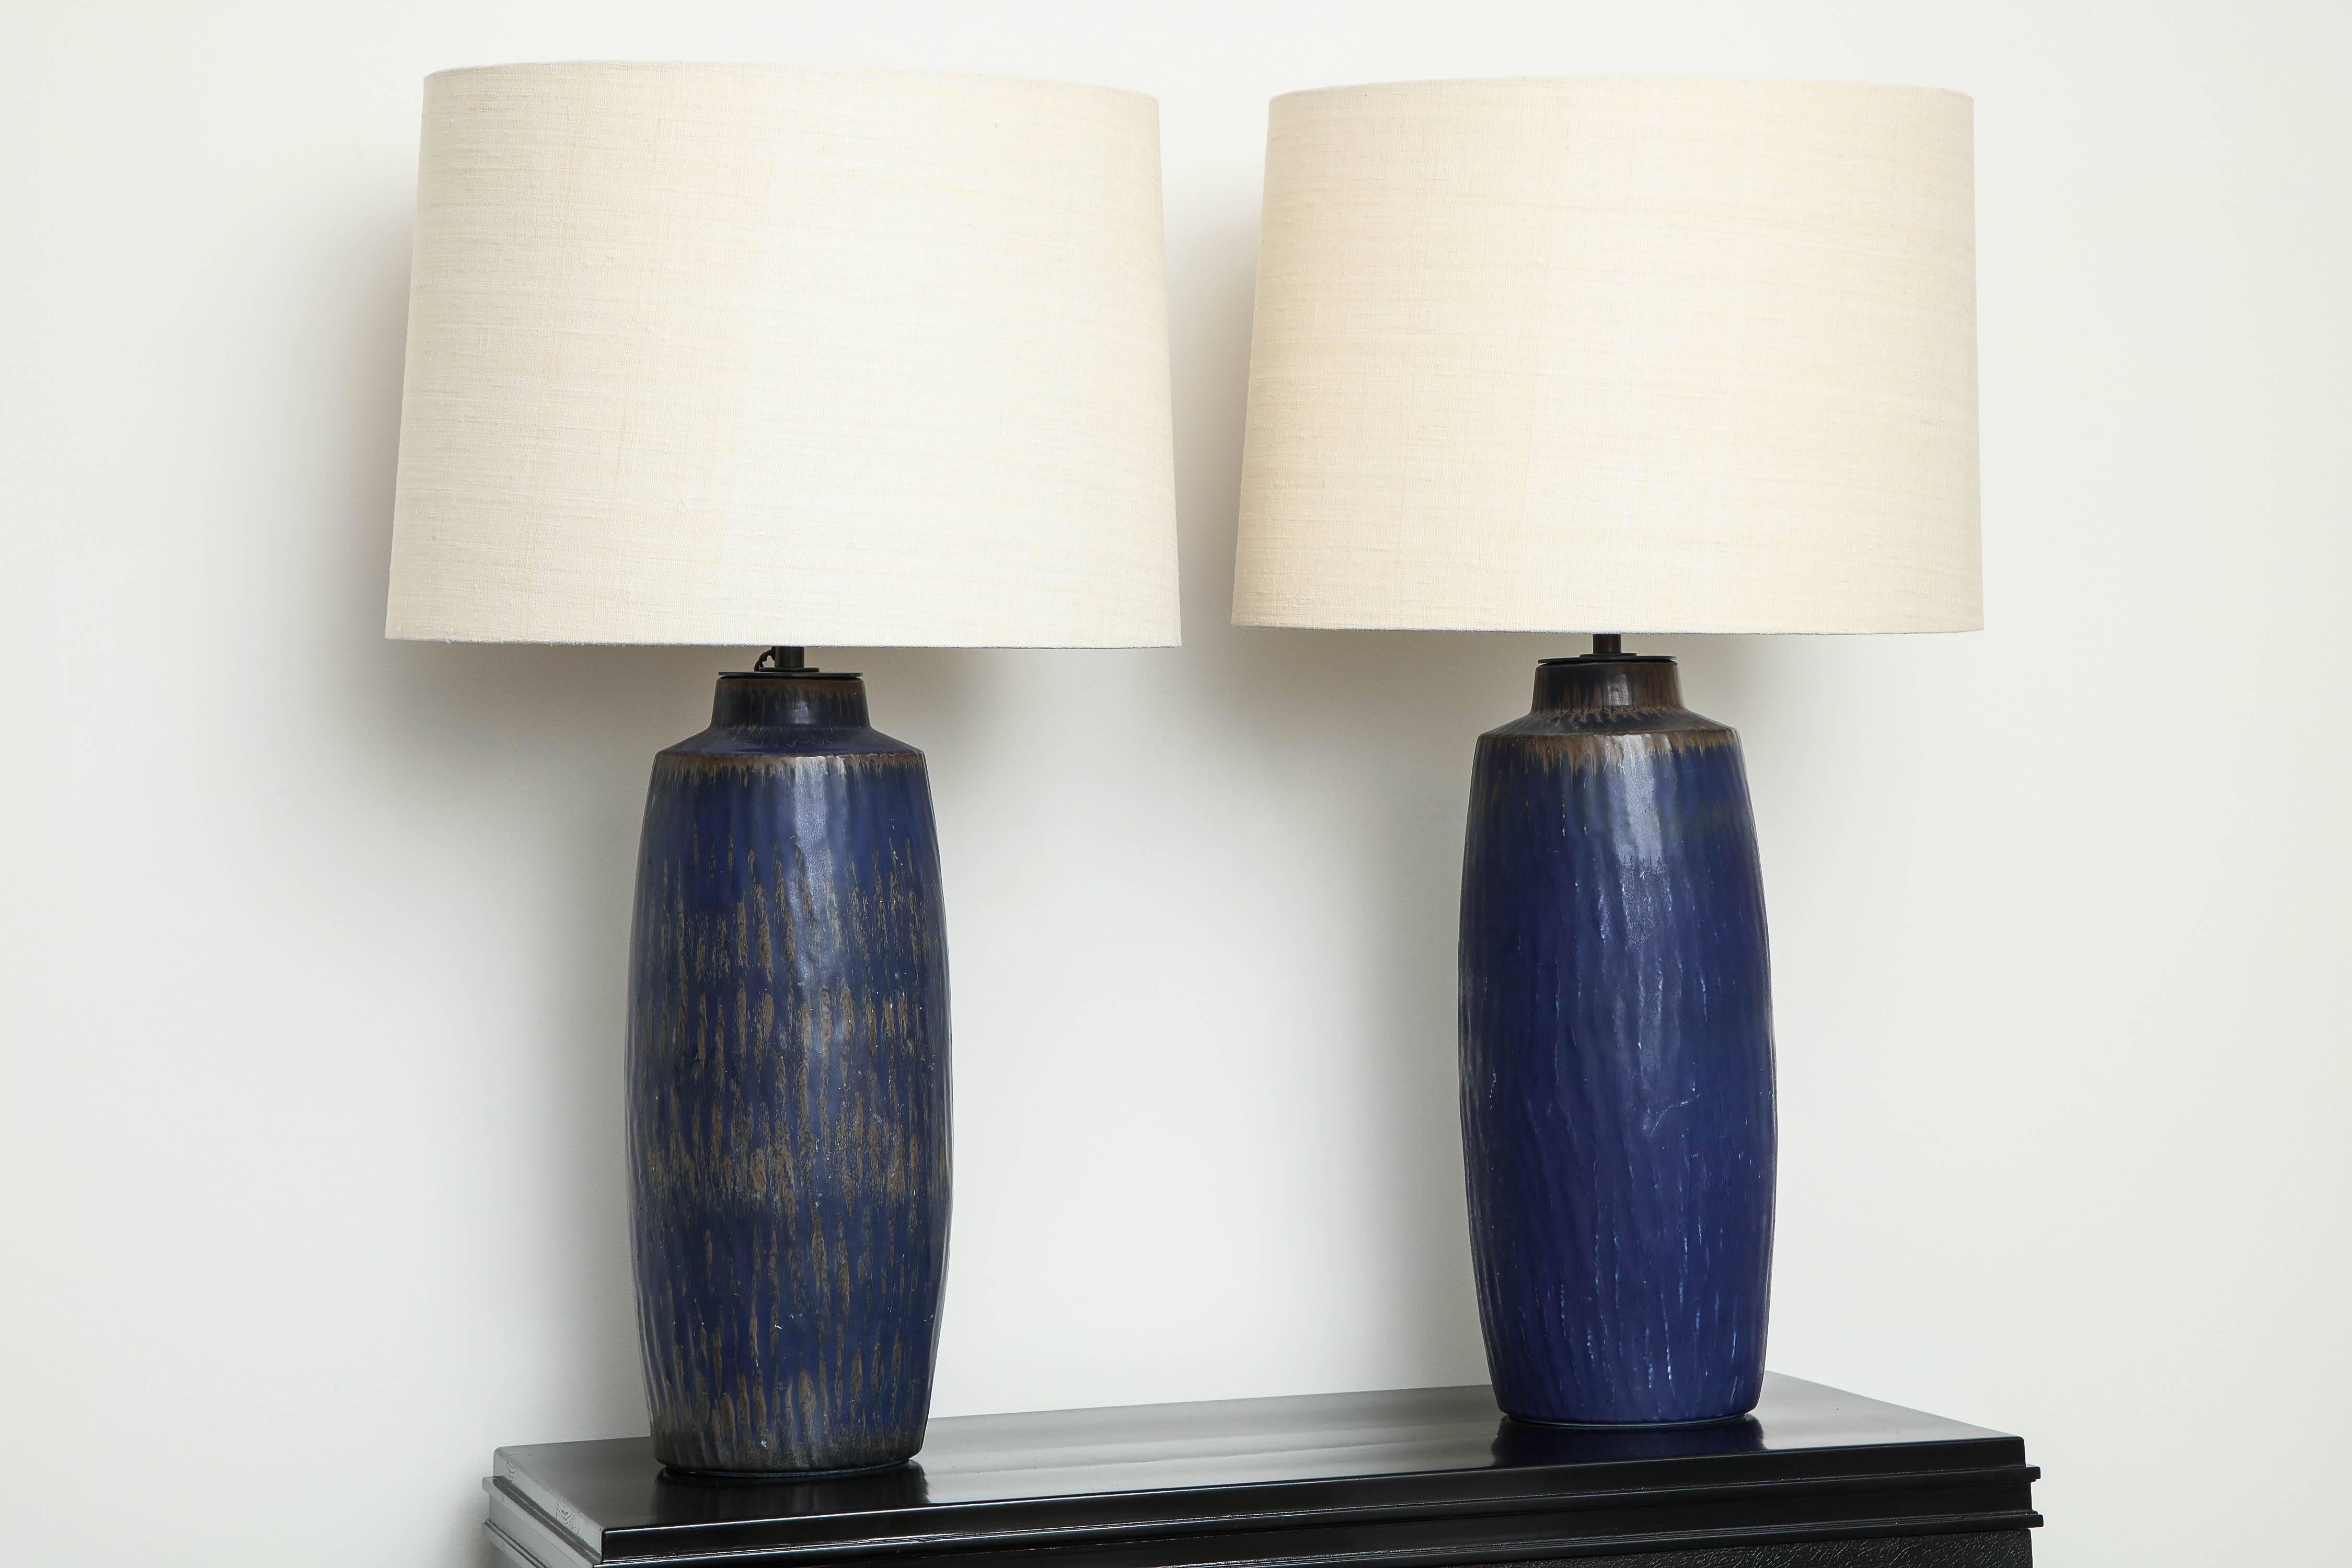 Unique pair of ceramic lamps from Rörstrand Studio, Sweden, circa 1950 by Gunnar Nylund. Made of stoneware, brand new shades and current wiring. Signed with artist marks. 

Gunnar Nylund (Swedish 1904-1997)
Pair of Ceramic Lamps, Rörstrand